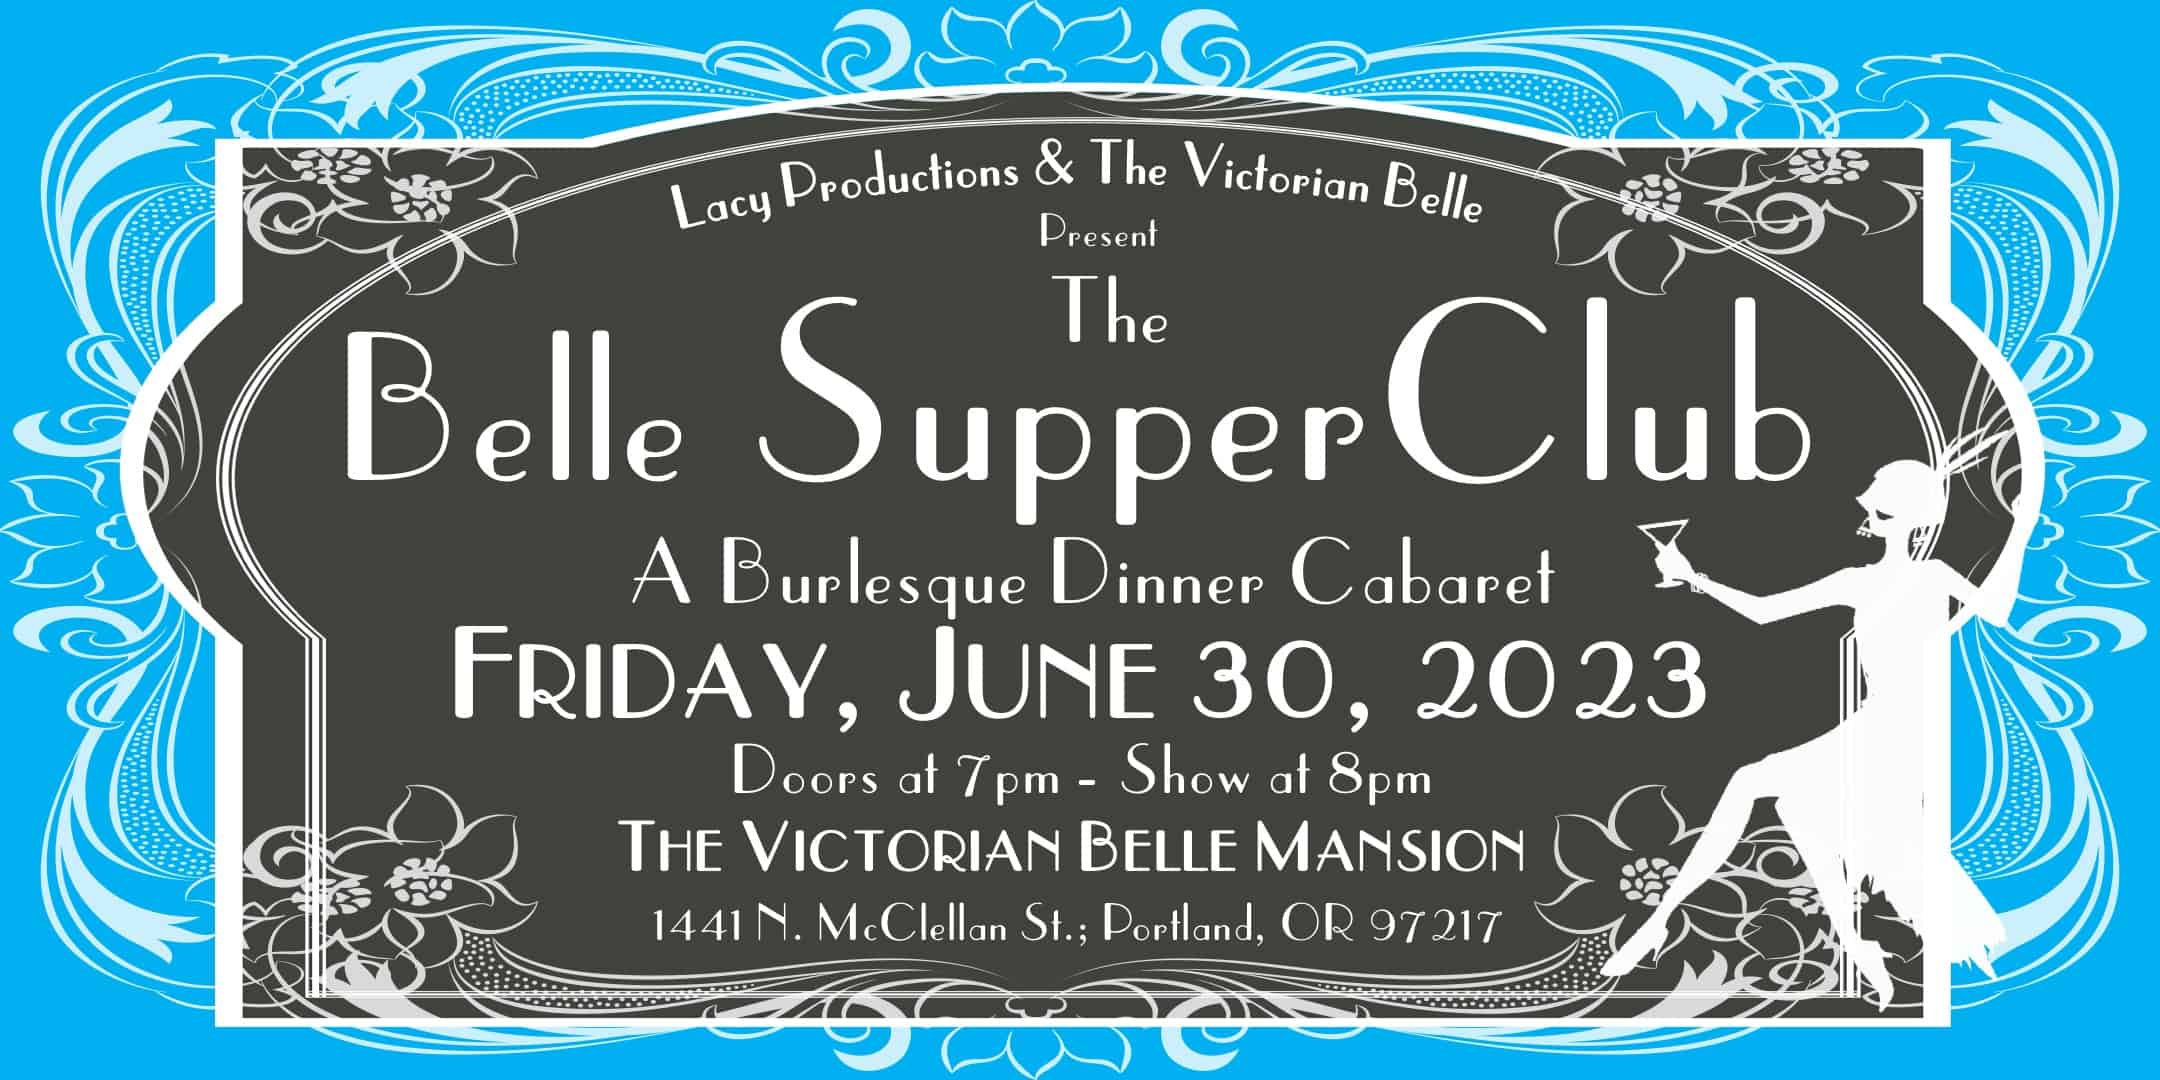 The Belle Supper Club: A Burlesque Dinner Cabaret. Friday, June 30th, 2023. Doors at 7:00 PM. Show at 8:00 PM